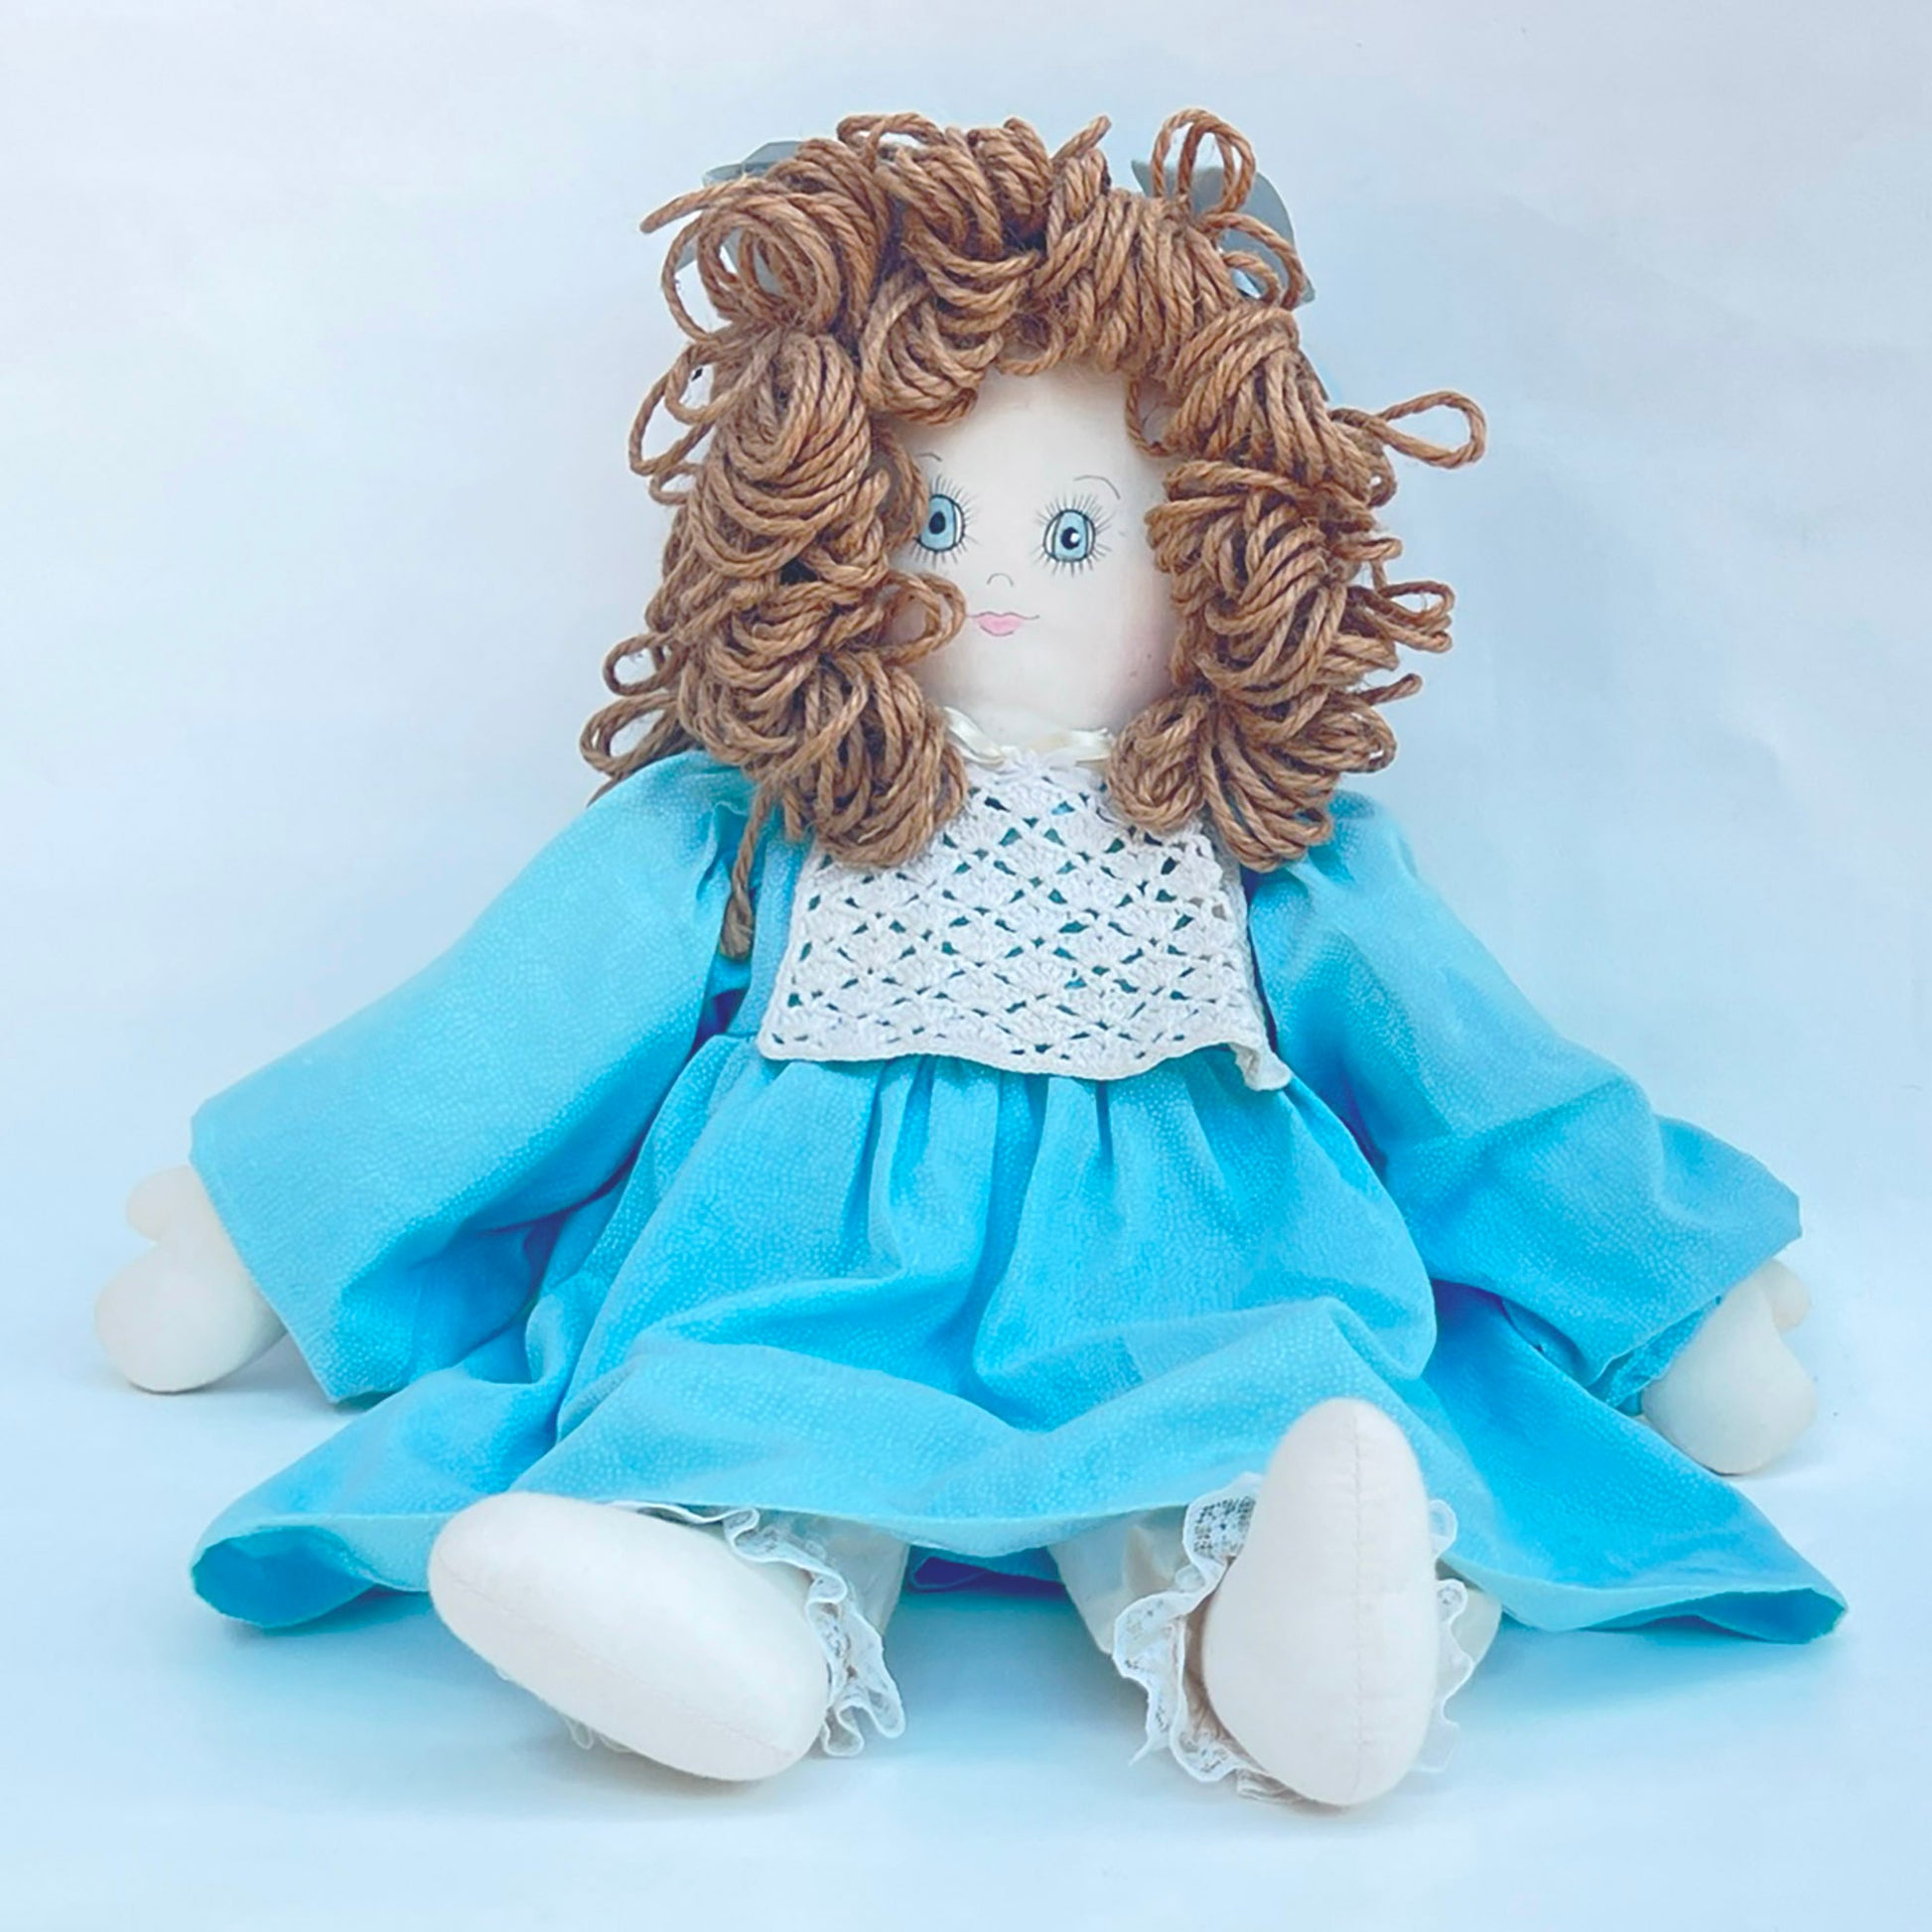 Ragamuffins-hand-made-cloth-doll-wearing-a-blue-dress,-pantaloons,-and-bib.-Signed-by-C.-Buehner.-Shop-eBargainsAndDeals.com.